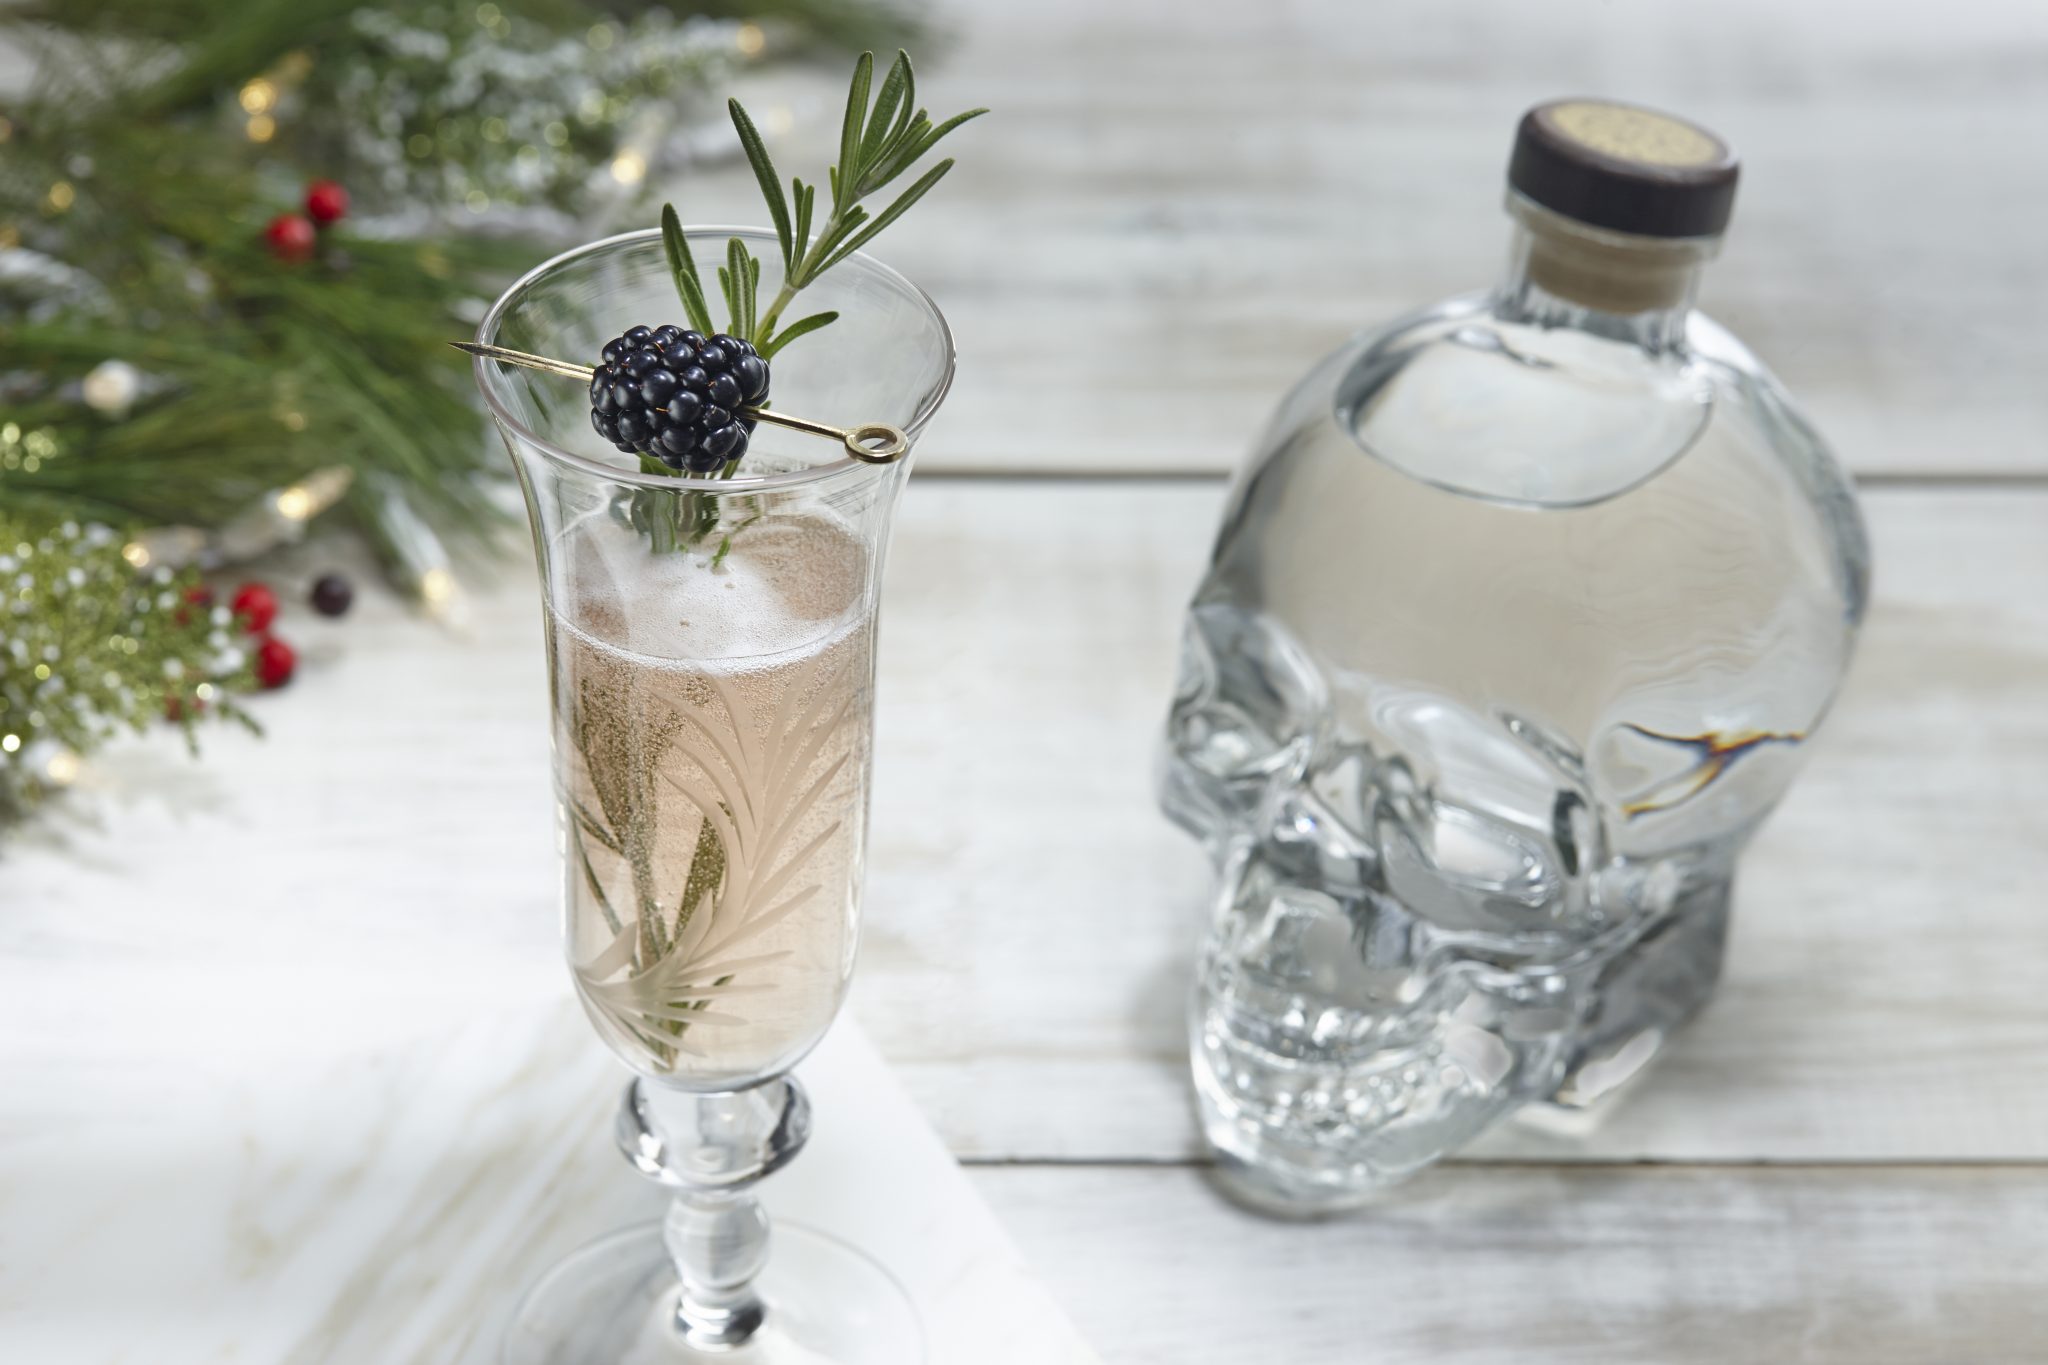 Mouth Watering Holiday Cocktail Recipes from Crystal Head Vodka